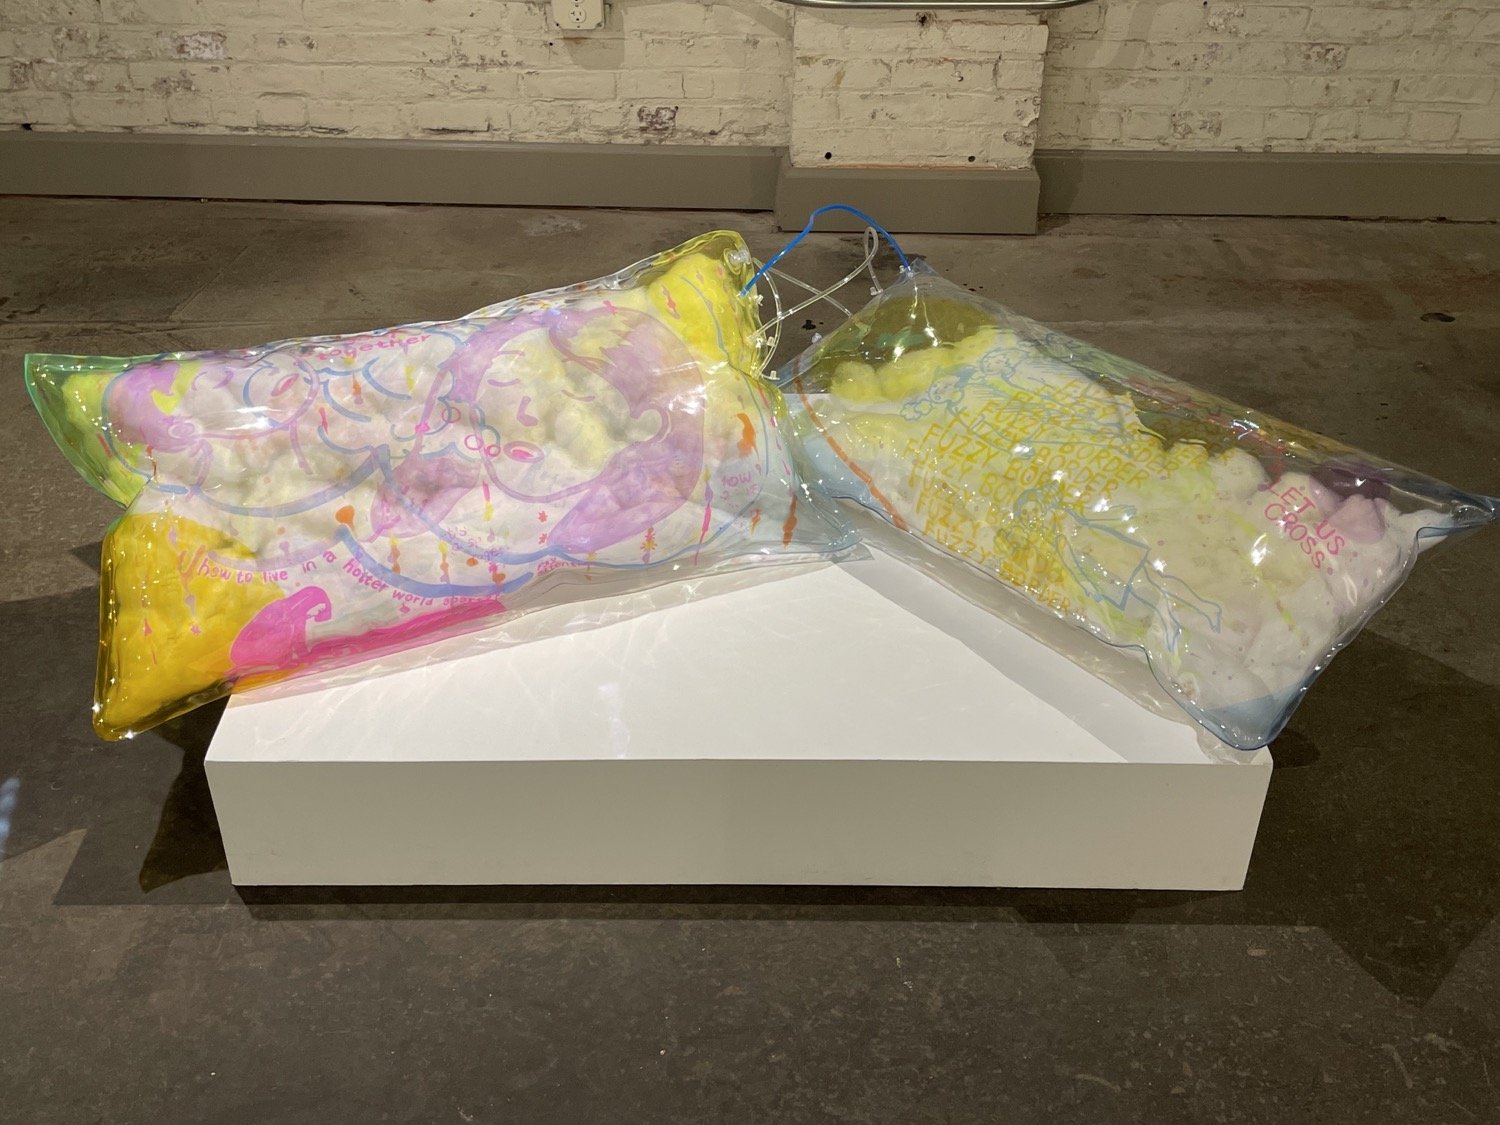  Let’s gasp together. PVC pillow, stuffings, dye, PVC tubes; 2021, 20x30in each 